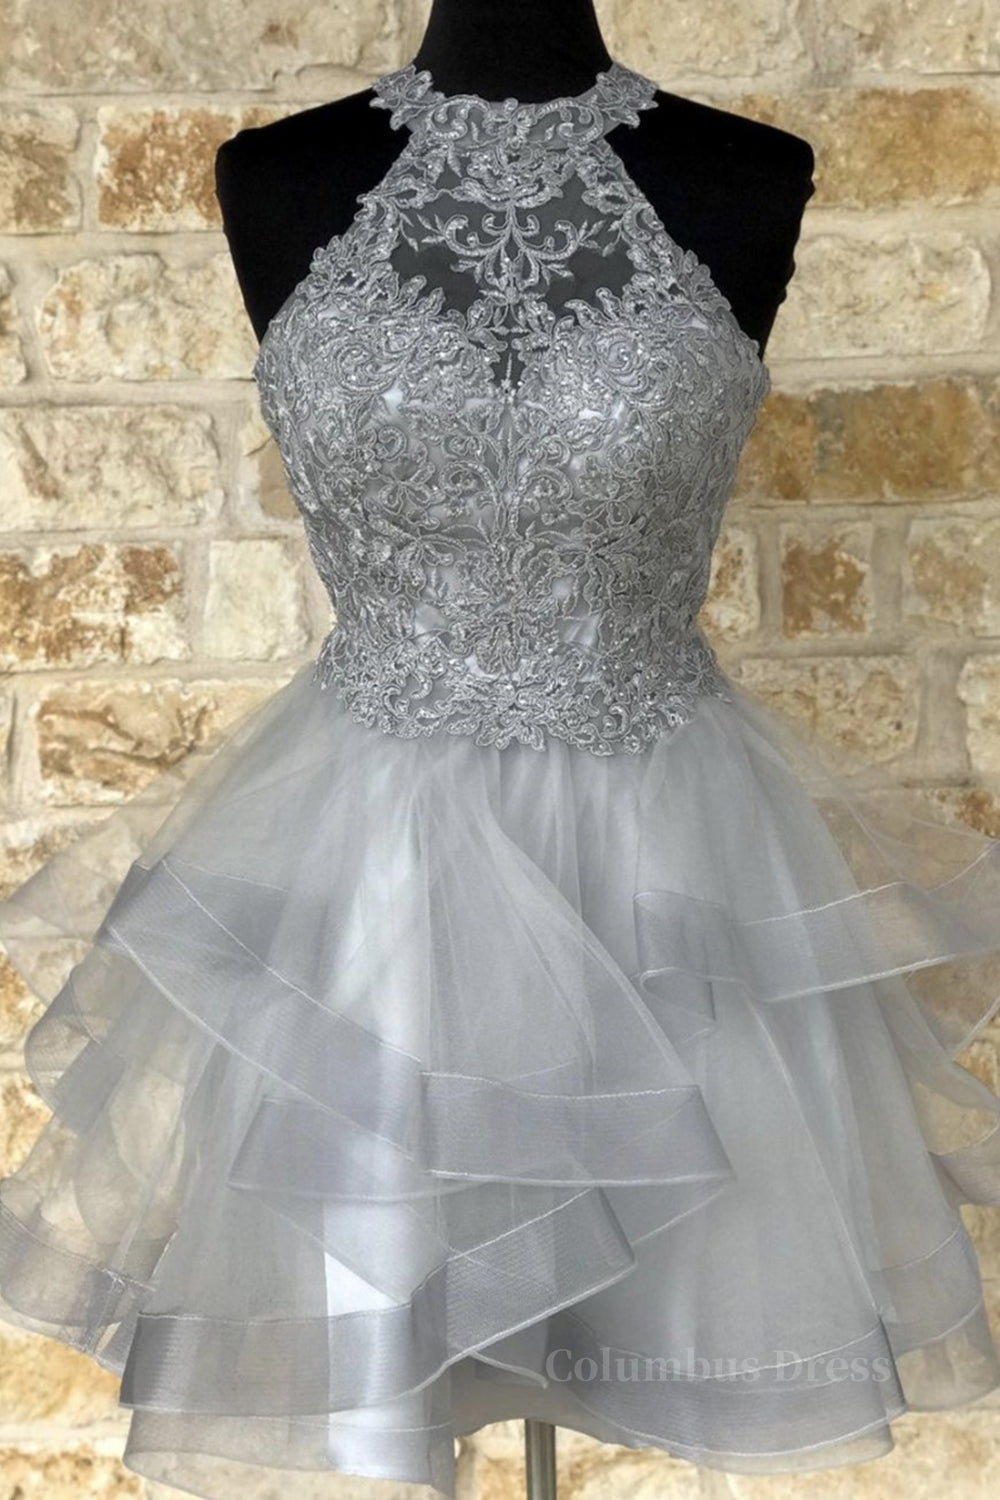 Sparklie Dress, Gray Lace Short Prom Dresses, Fluffy Gray Lace Homecoming Dresses, Gray Formal Evening Dresses